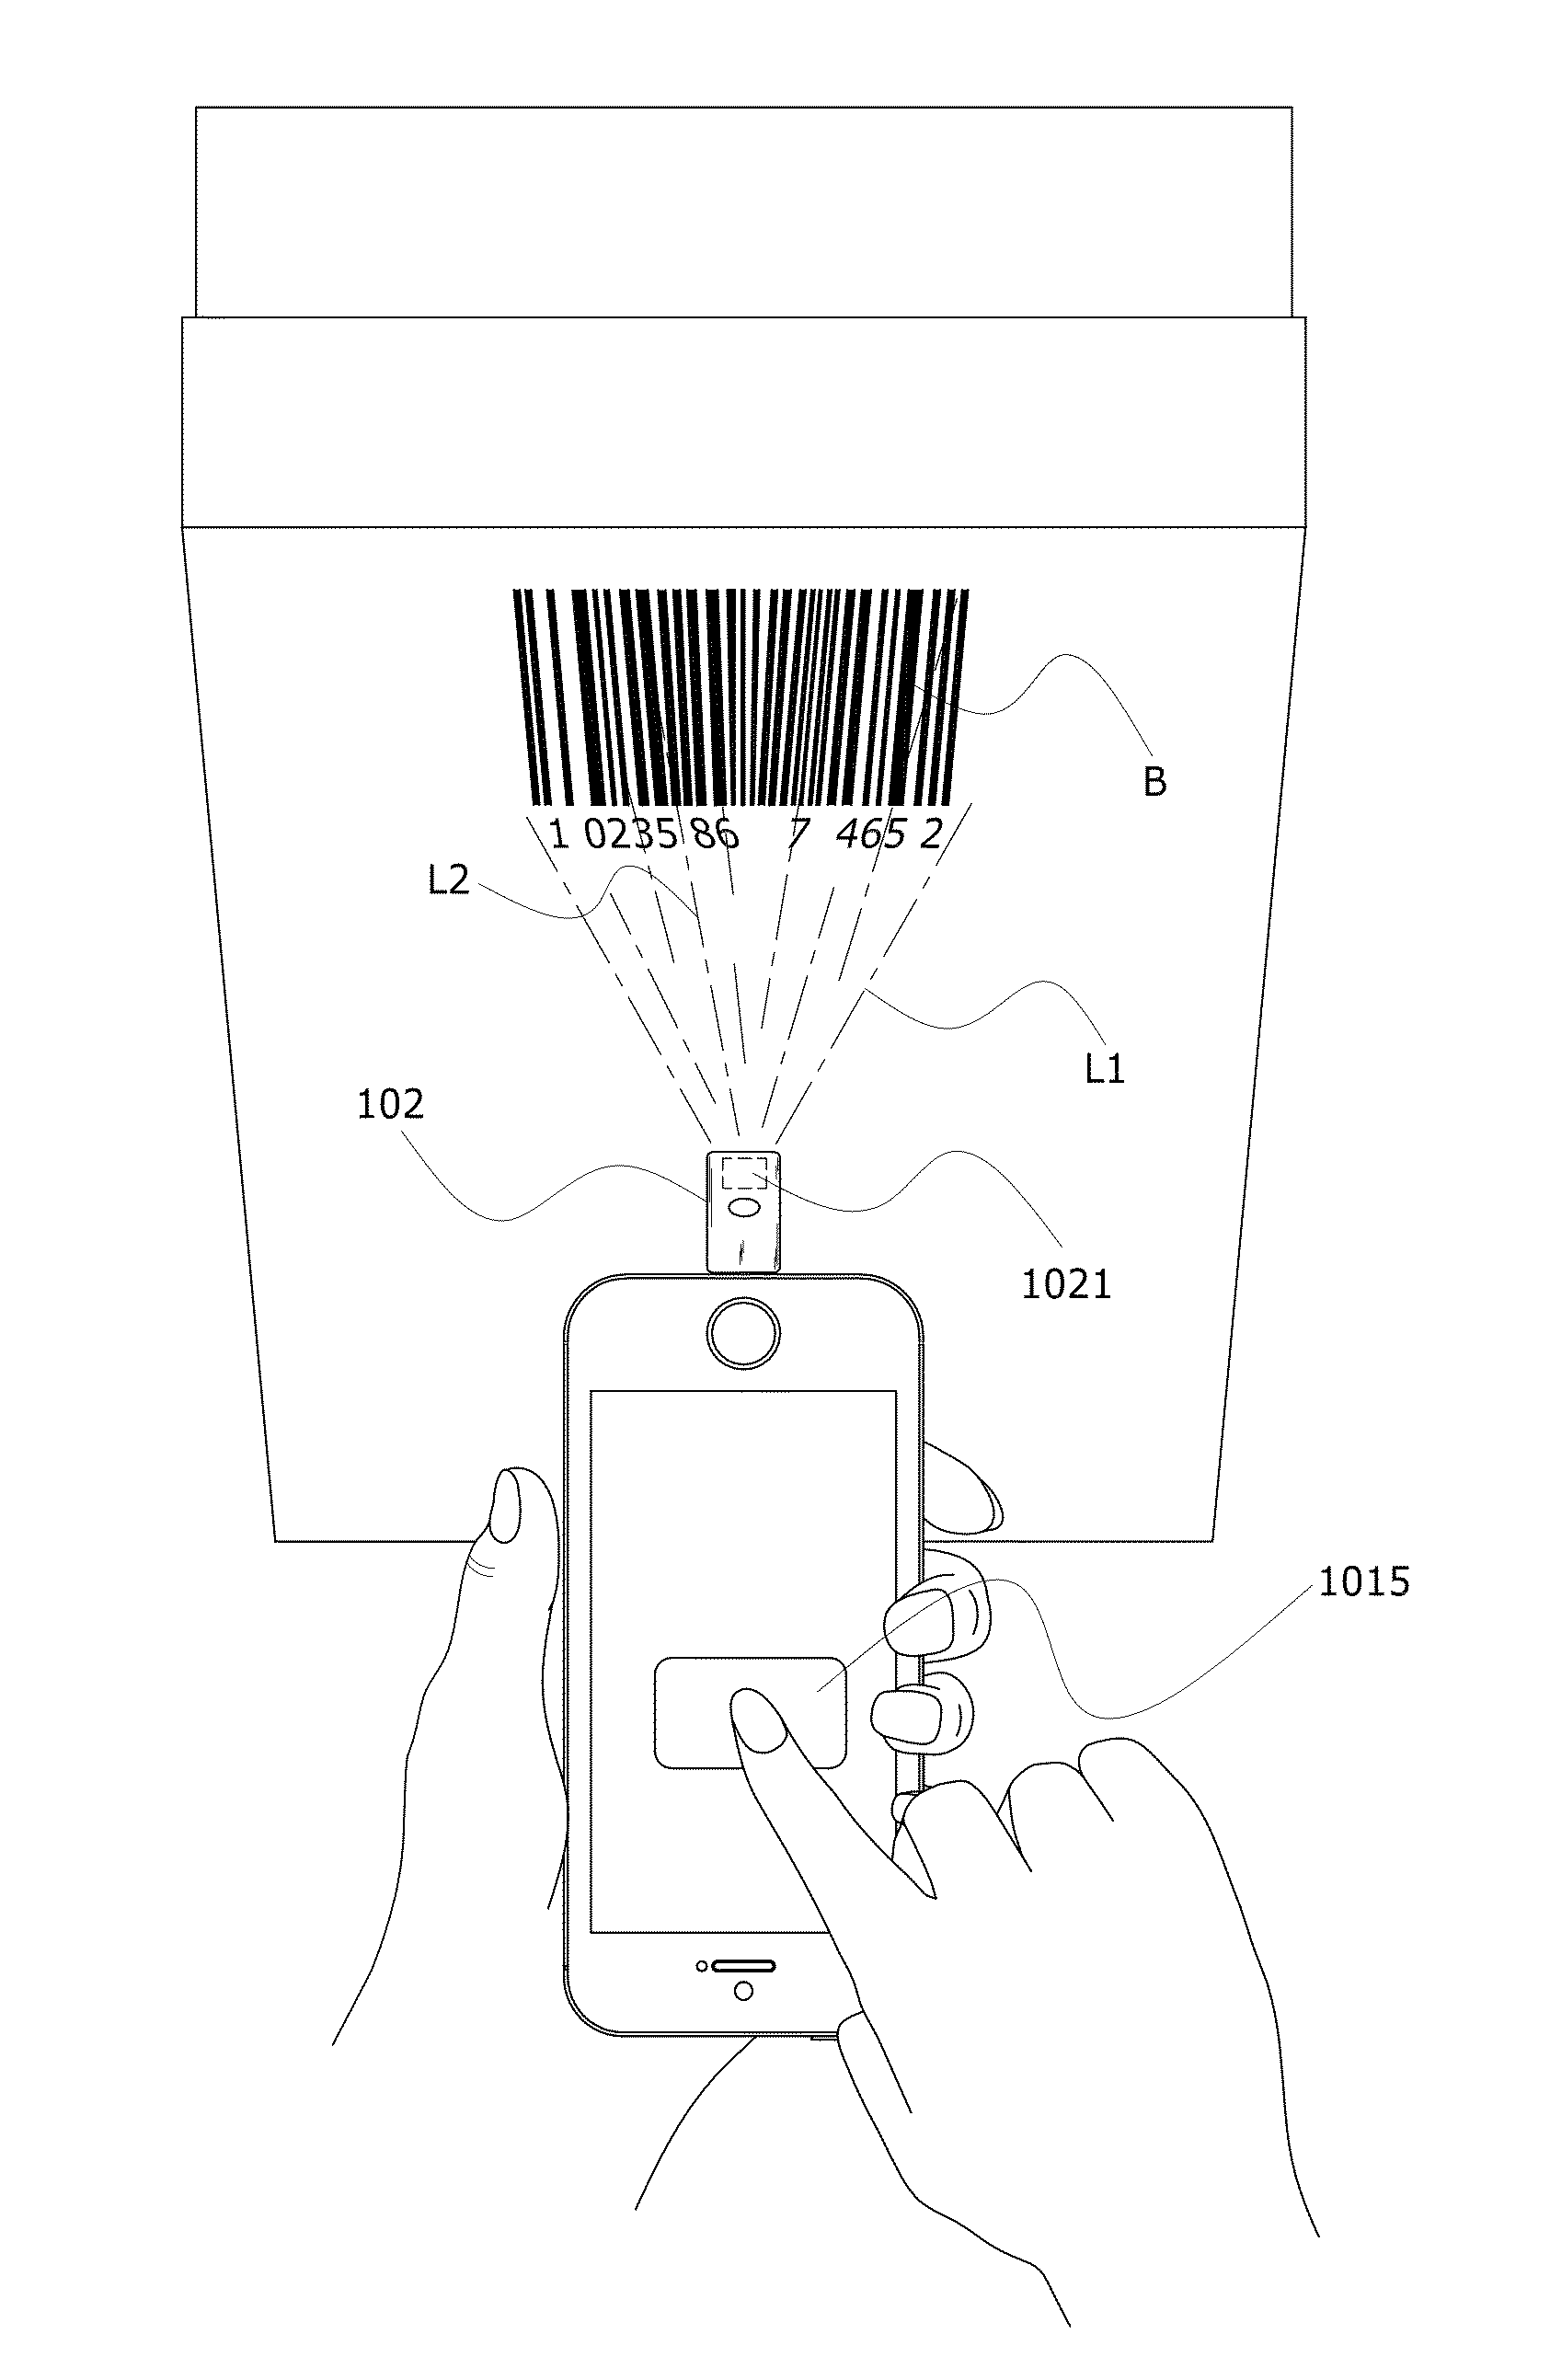 Mobile barcode information reading system